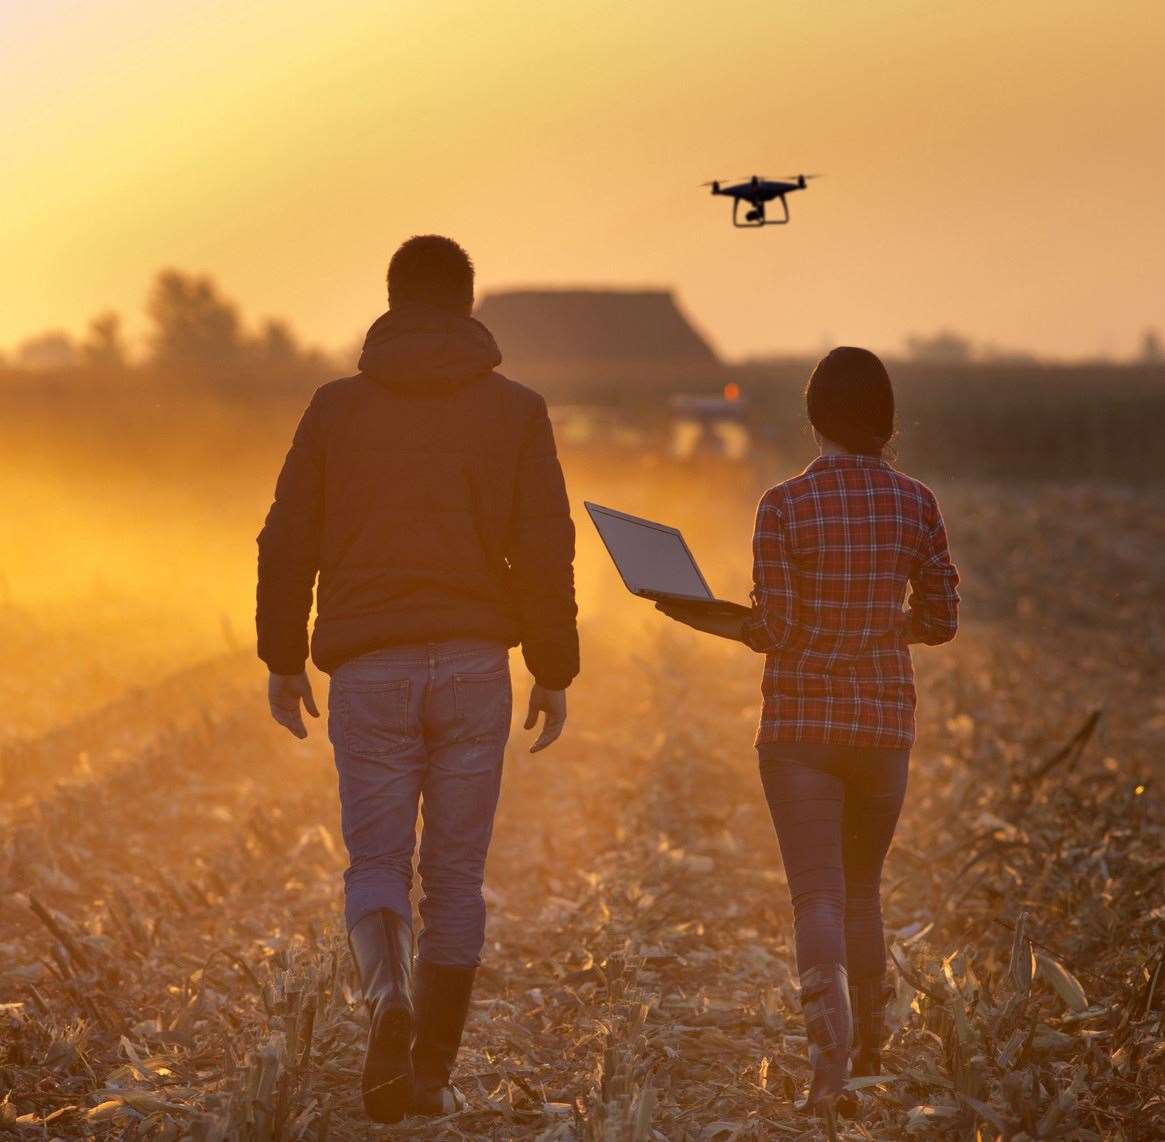 Using new technology such as drones is part of a modern horticulturalists' arsenal